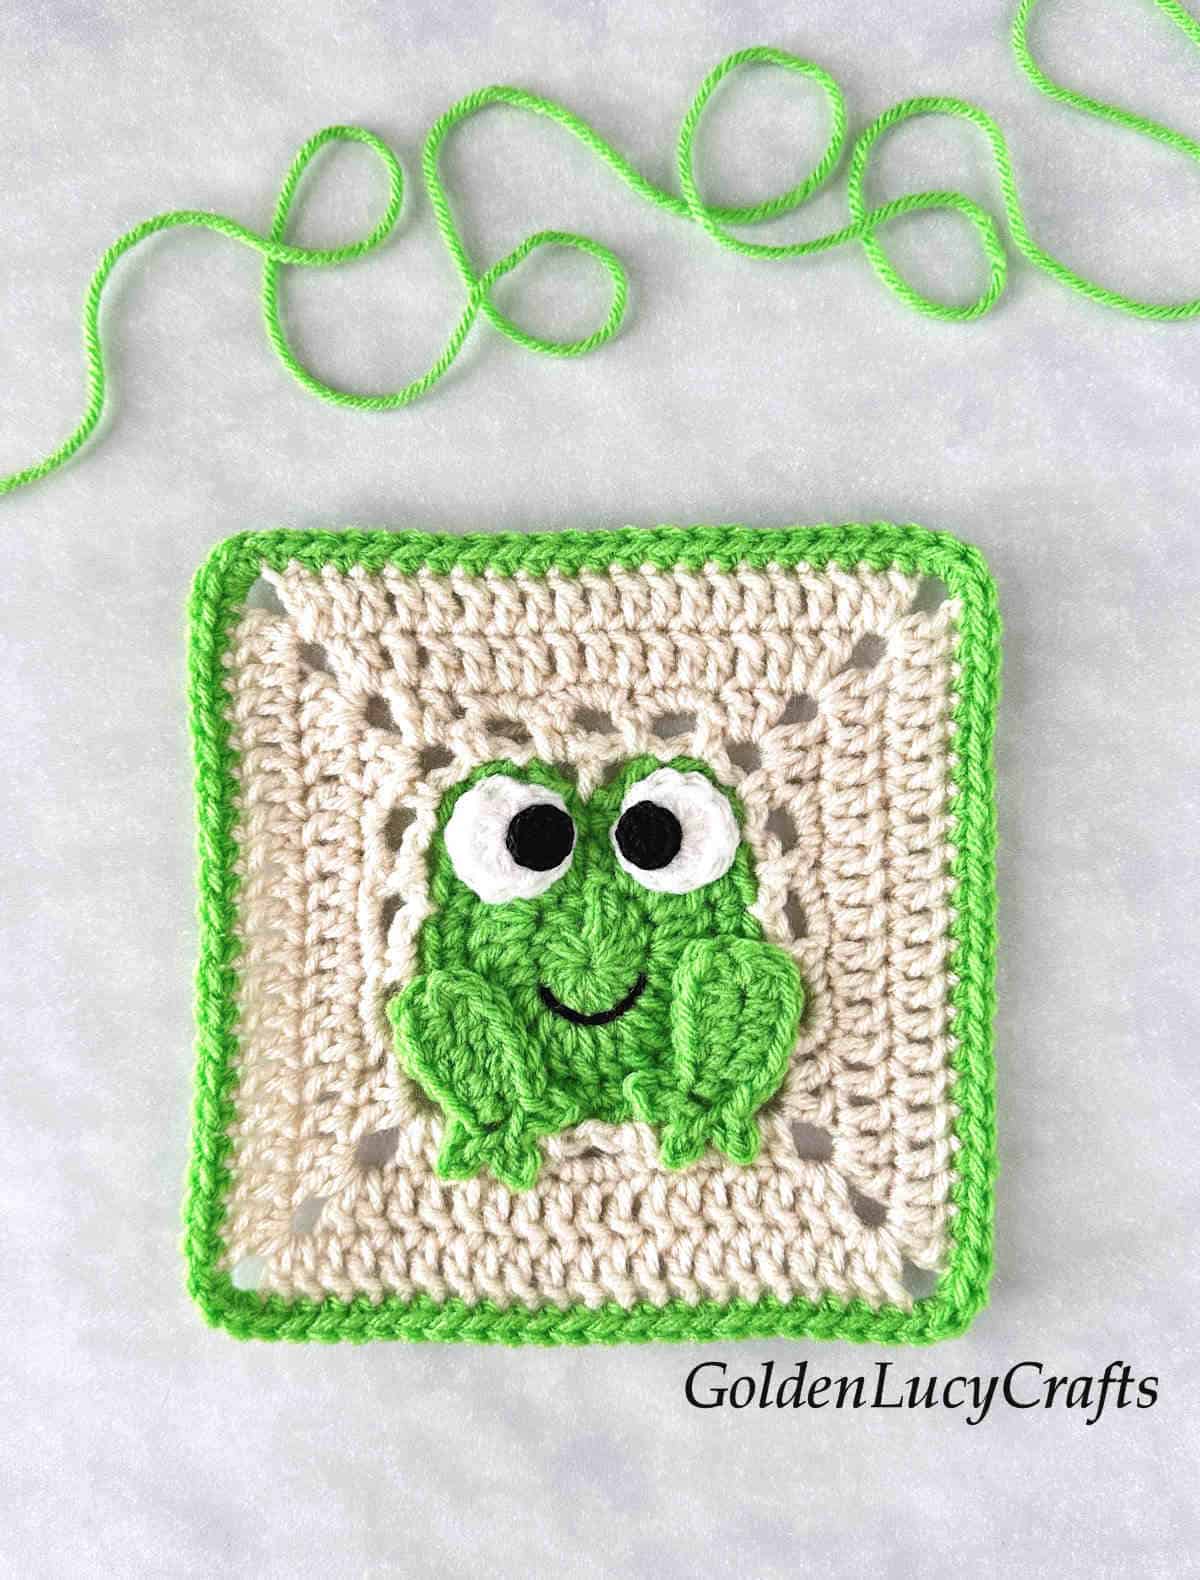 Crochet square with frog in the middle.